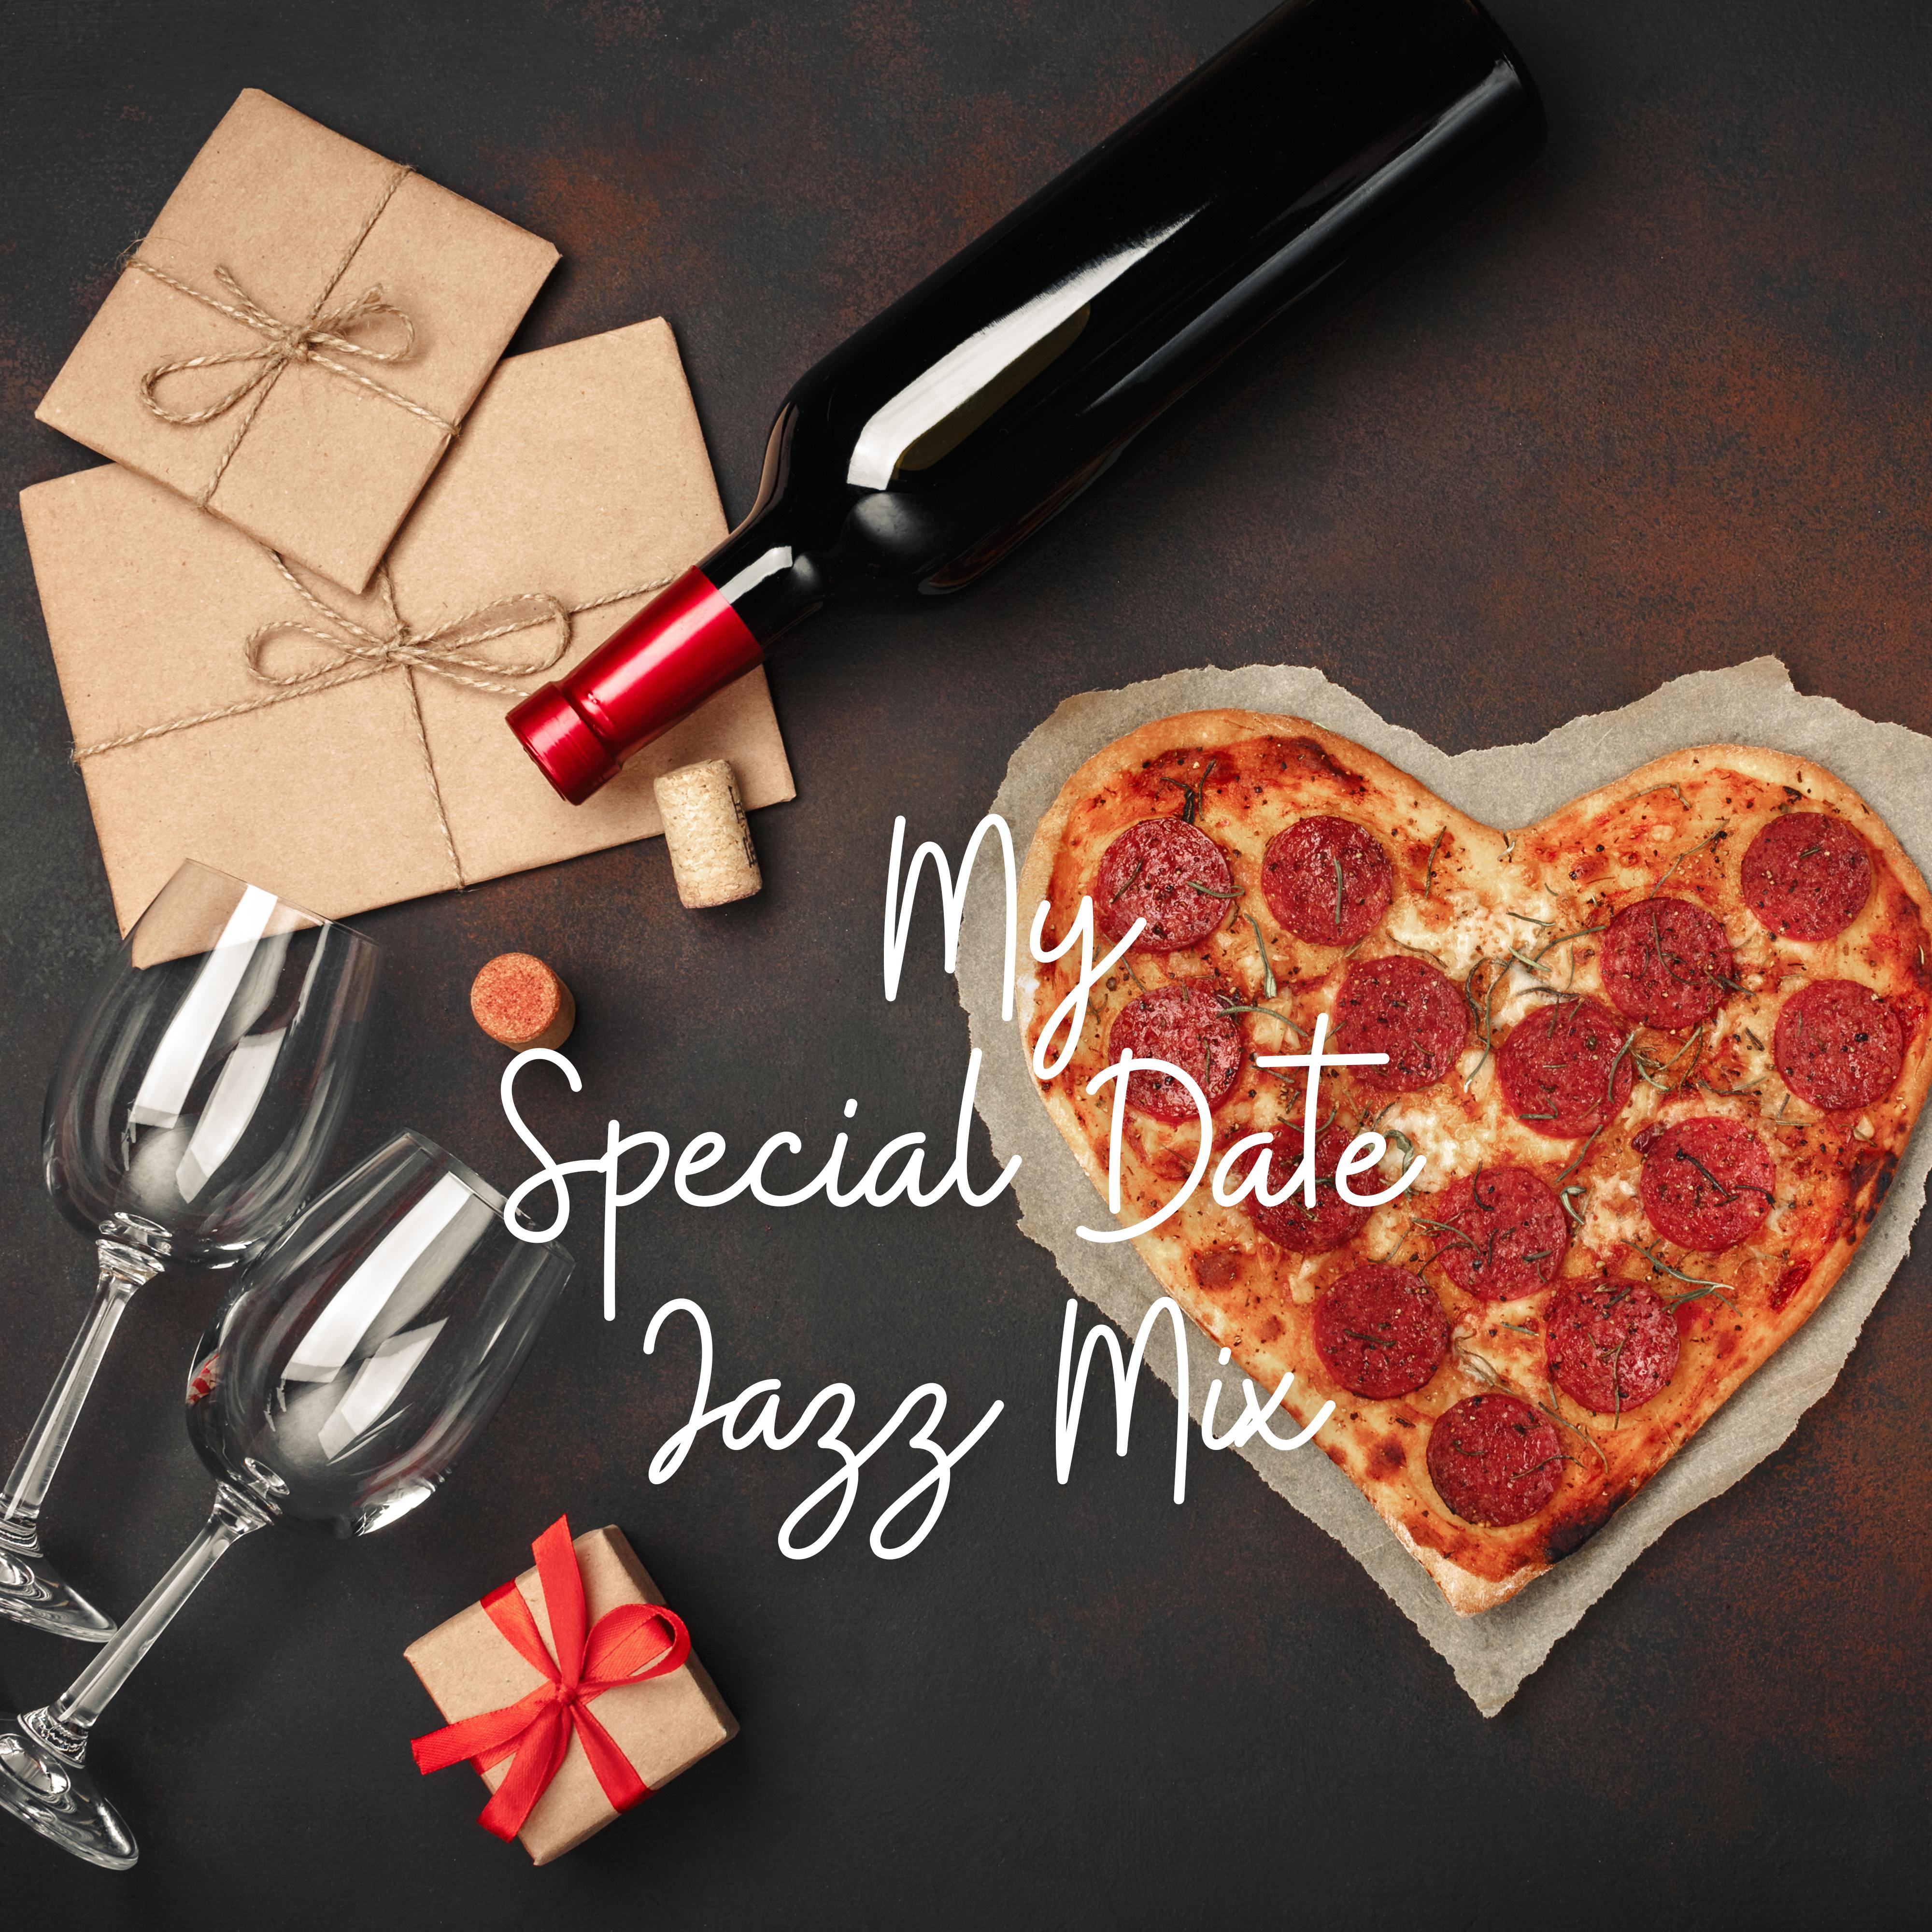 My Special Date Jazz Mix: 2019 Instrumental Smooth Jazz Music Compilation Created for Romantic Date with Love, Perfect Couple' s Time Spending in Restaurant, Sensual Sounds for Evening Full of Love  Sex